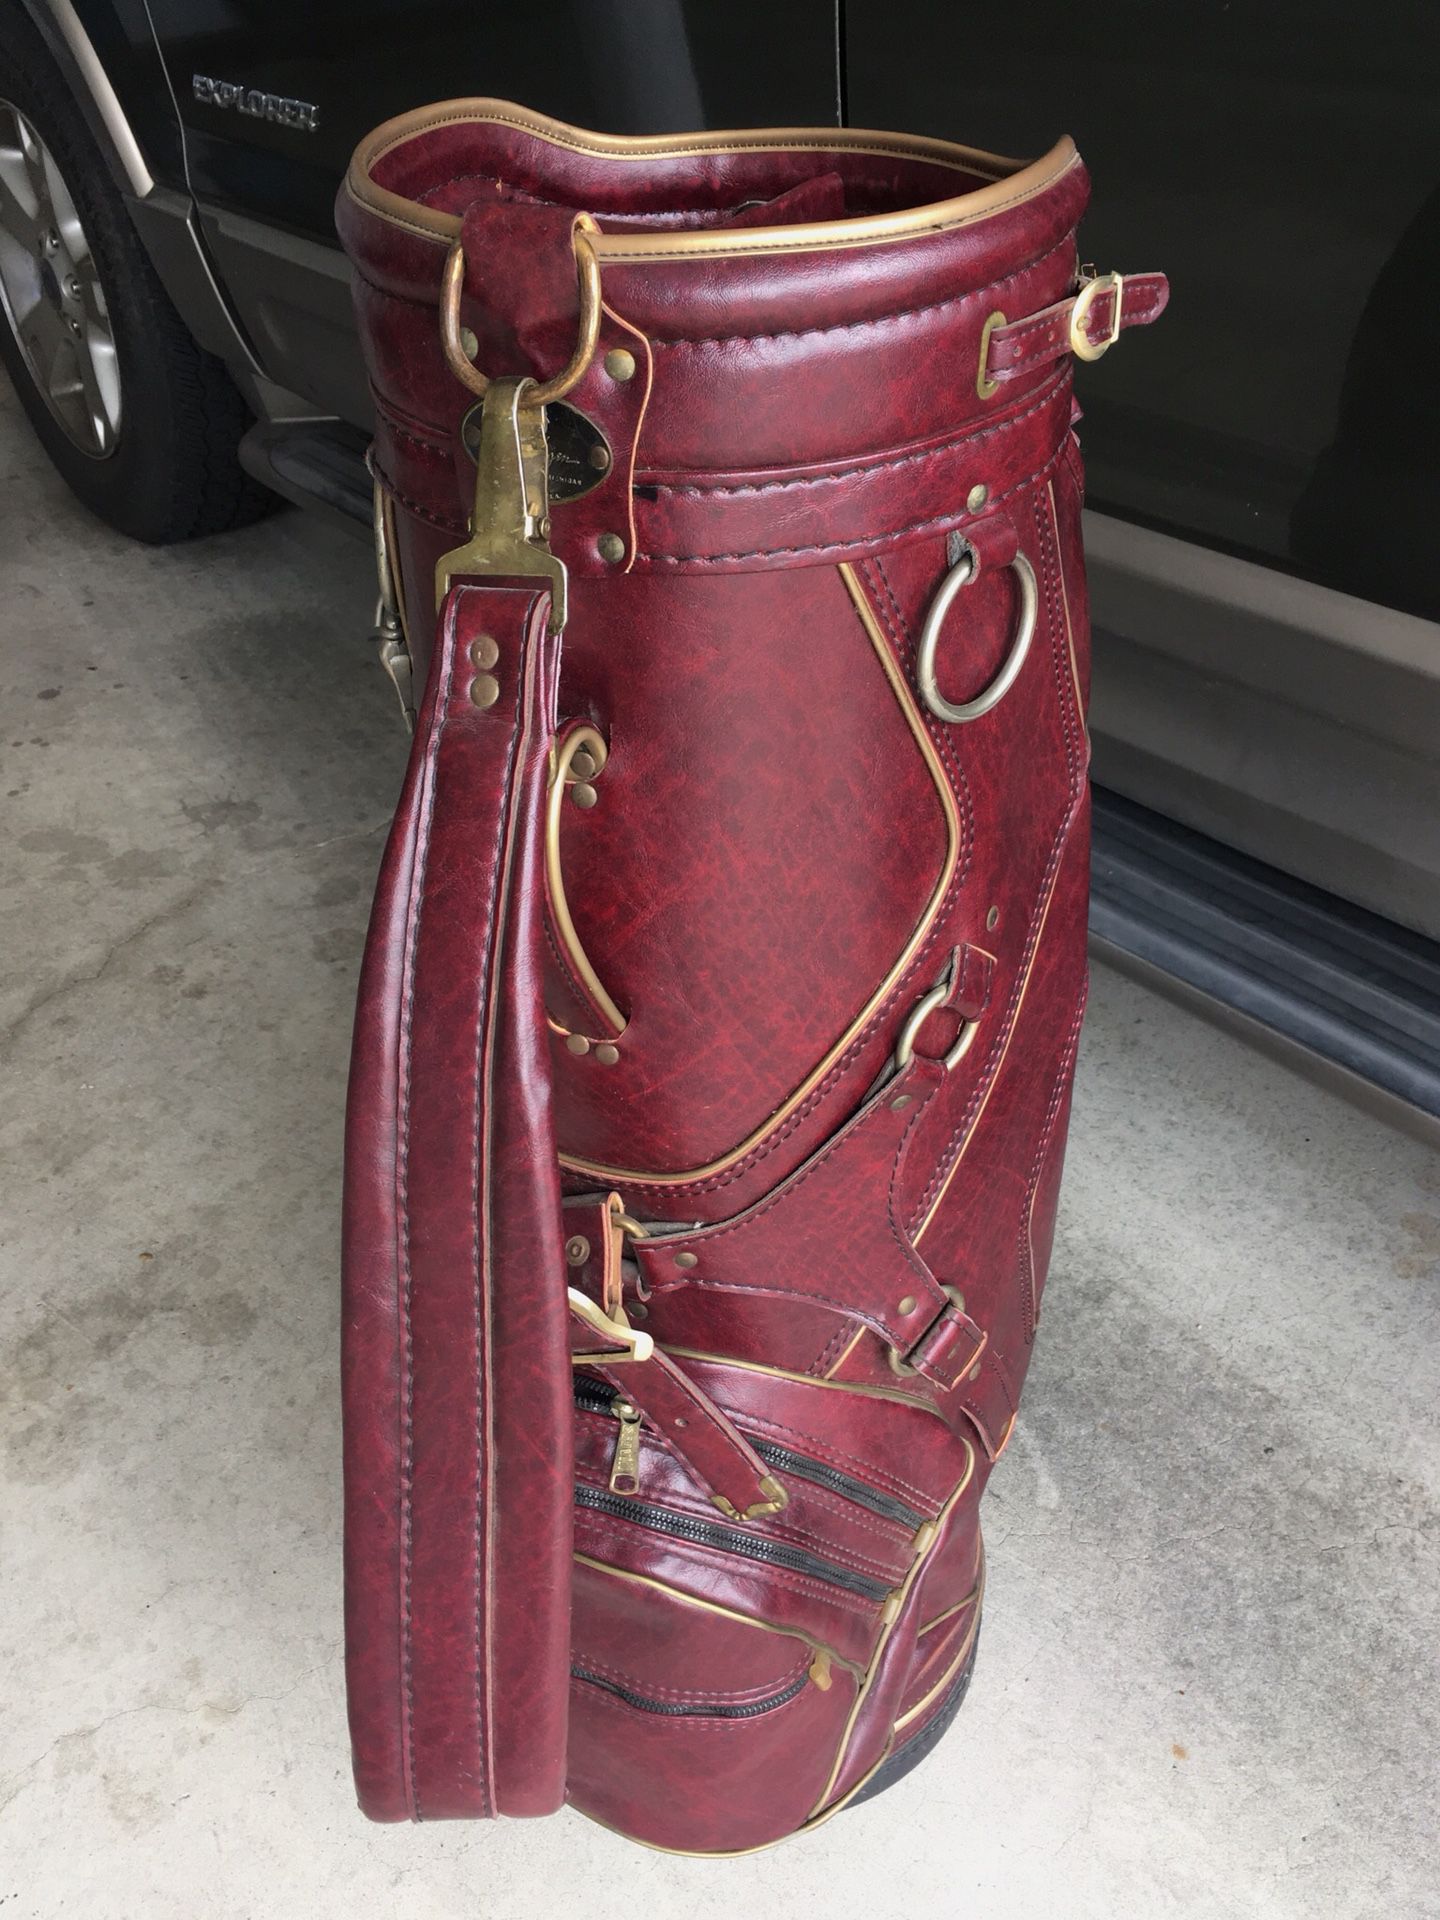 70s authentic rare Gucci golf bag for Sale in Apple Valley, CA